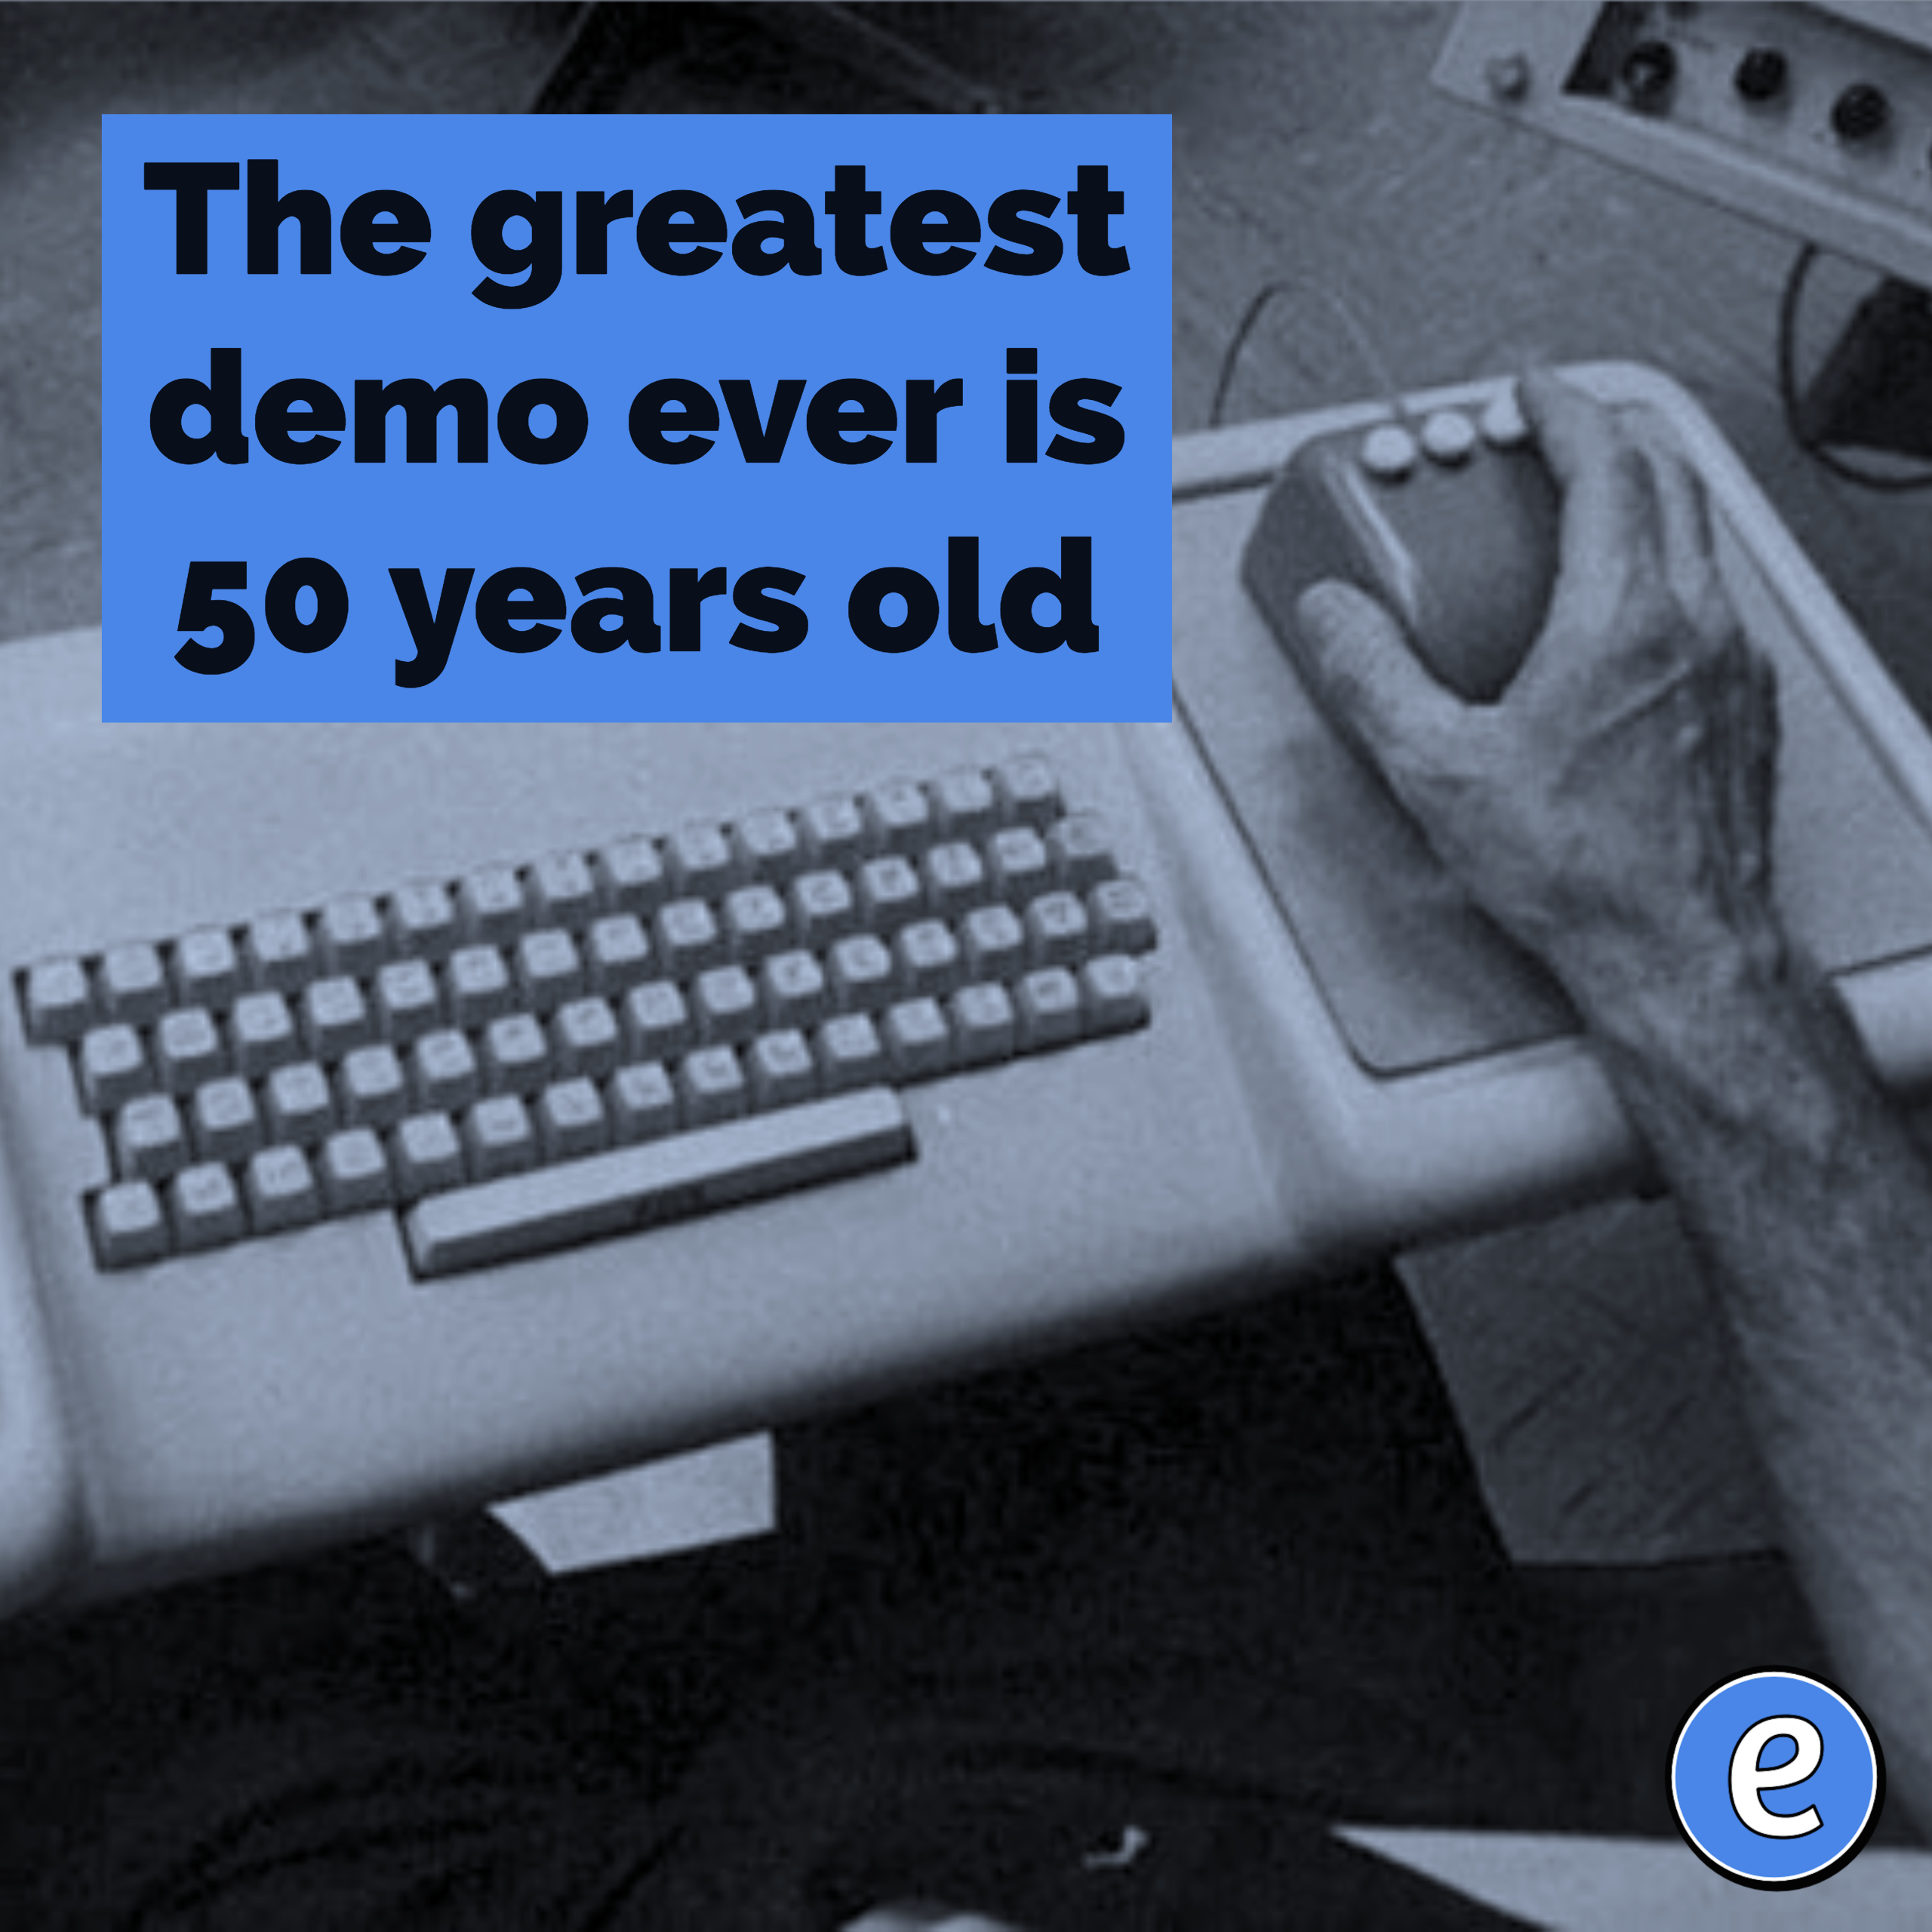 The greatest demo ever is 50 years old